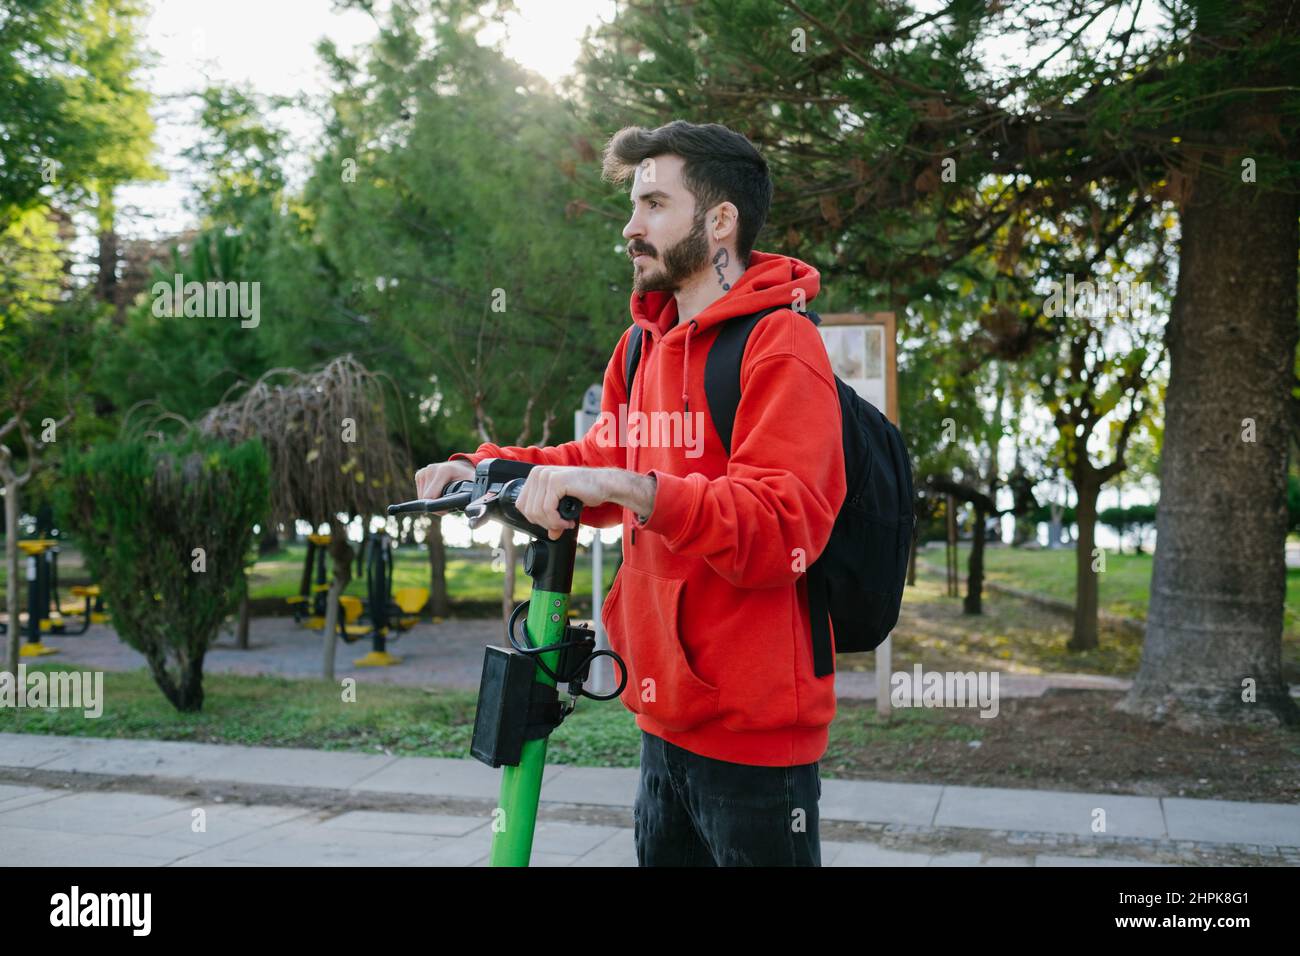 Driving electric scooter, young attractive student with backpack is driving his scooter at bright sunny day park background. Stock Photo